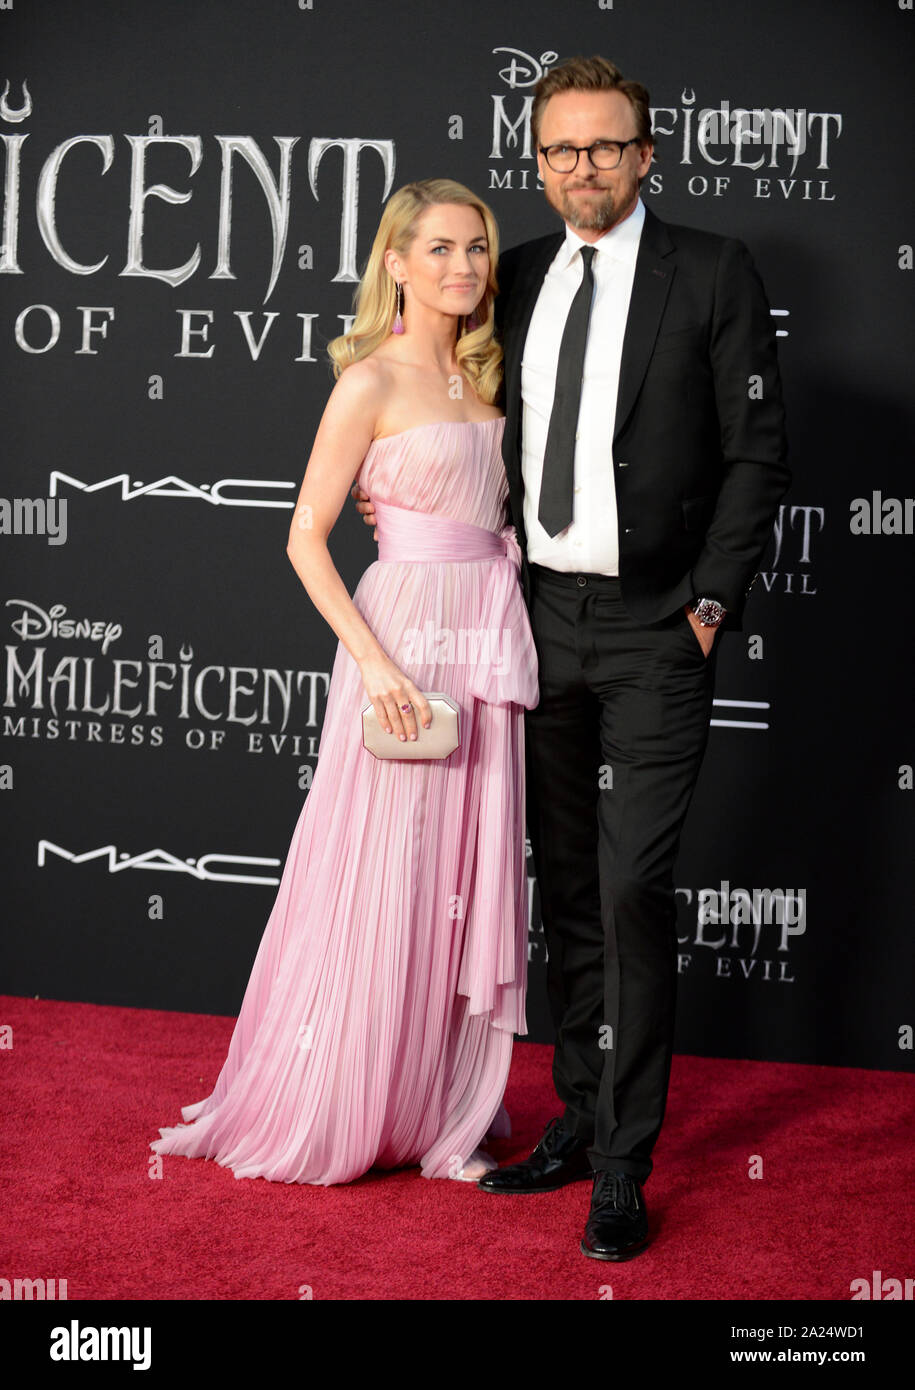 Los Angeles, USA. 30th Sep, 2019. Los Angeles, USA. 30th Sep, 2019. Amanda Hearst & Joachim Ronning at the world premiere of 'Maleficent: Mistress of Evil' at the El Capitan Theatre. Picture: Jessica Sherman/Featureflash Credit: Paul Smith/Alamy Live News Stock Photo